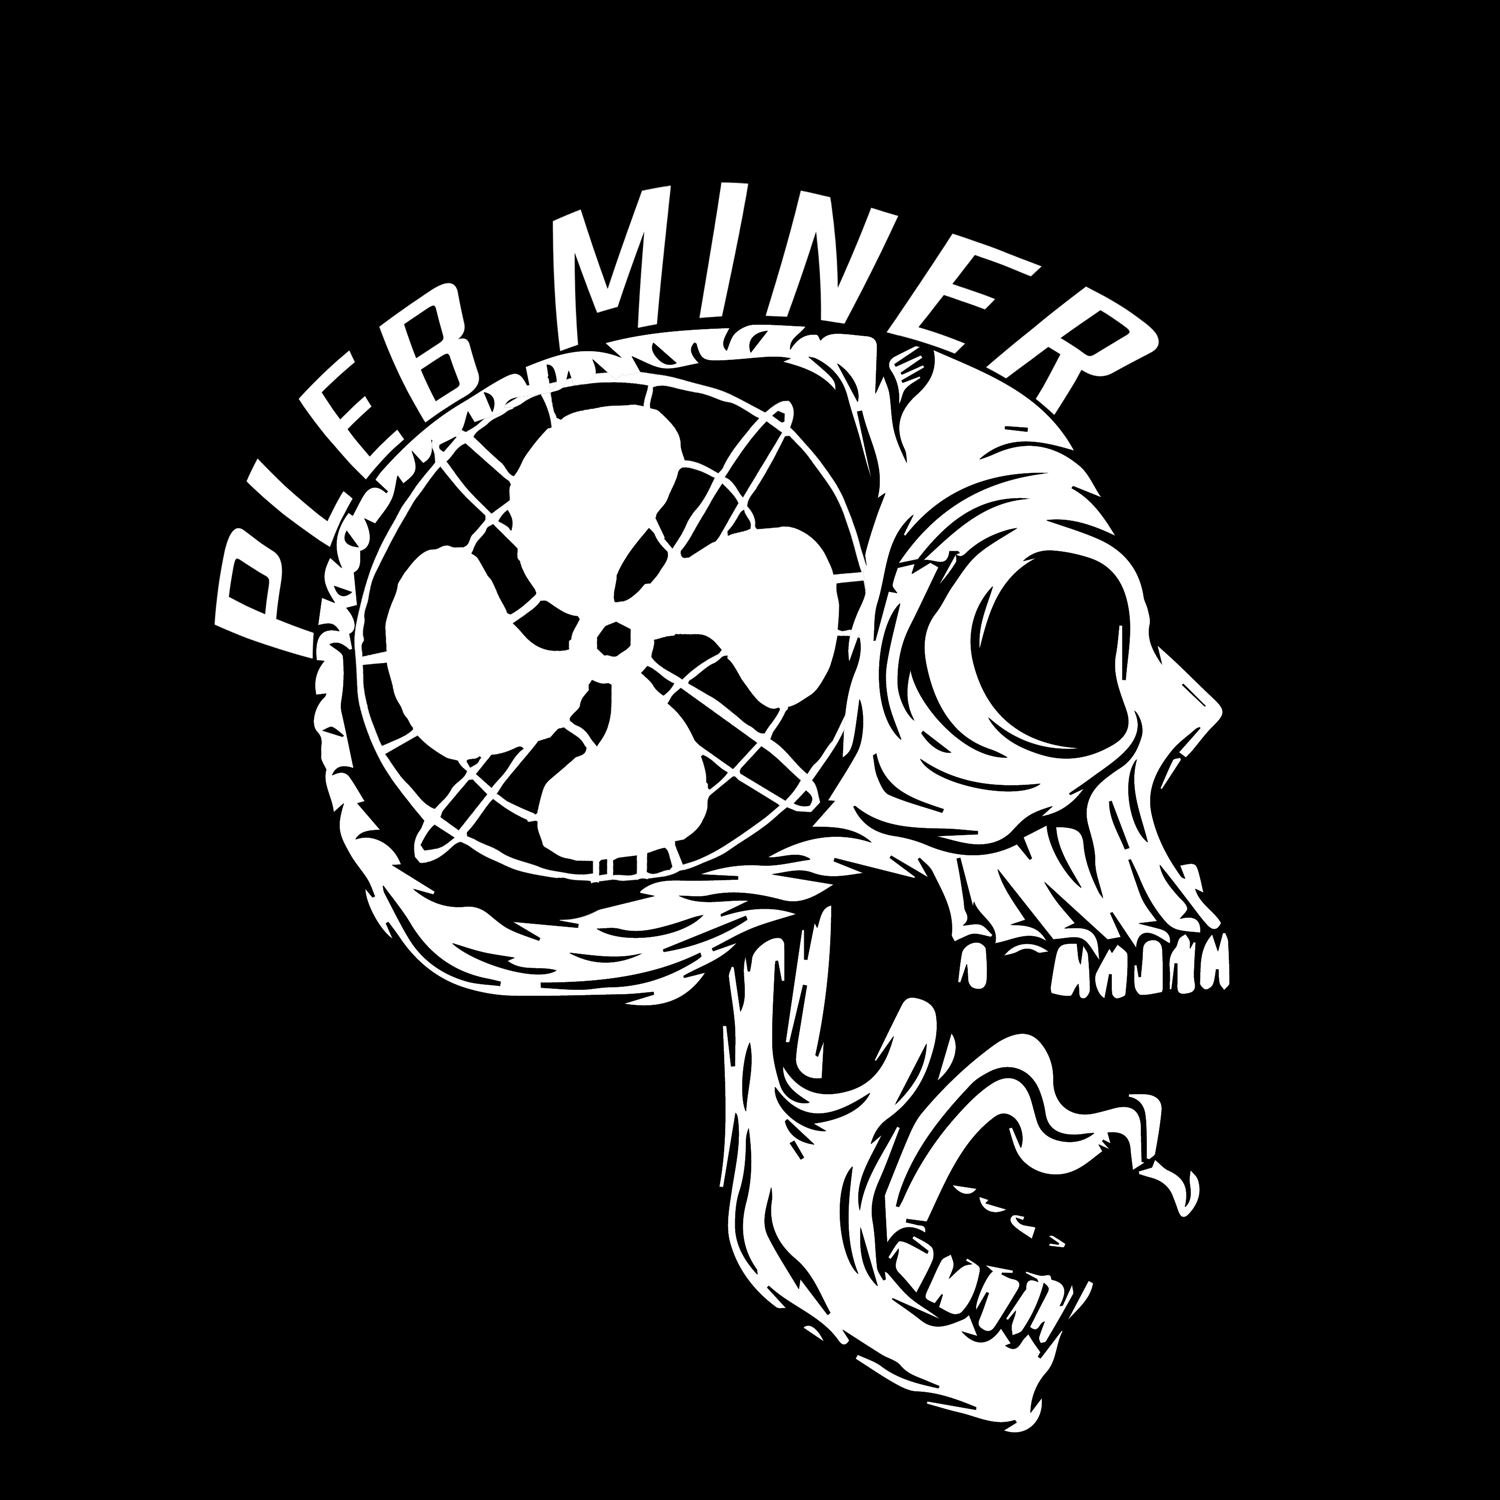 PMM005 A Bitcoin mining podcast focused on the Pleb Miner, the stalwart that defends the Bitcoin Network.